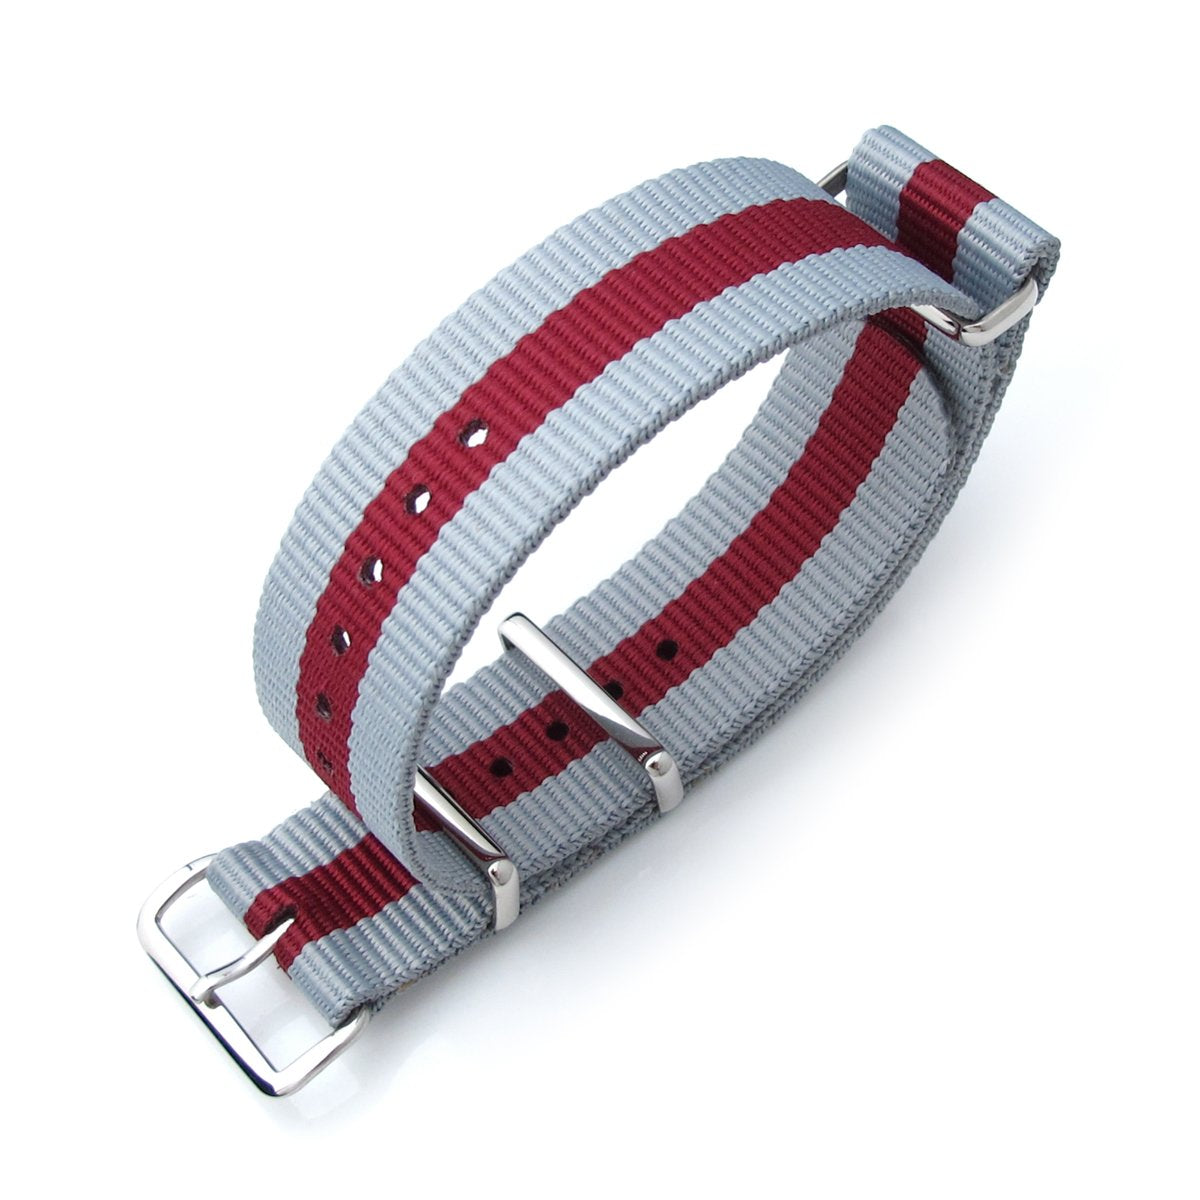 MiLTAT 20mm or 22mm G10 NATO Military Watch Strap Ballistic Nylon Armband Polished Grey &amp; Burgundy Red Strapcode Watch Bands